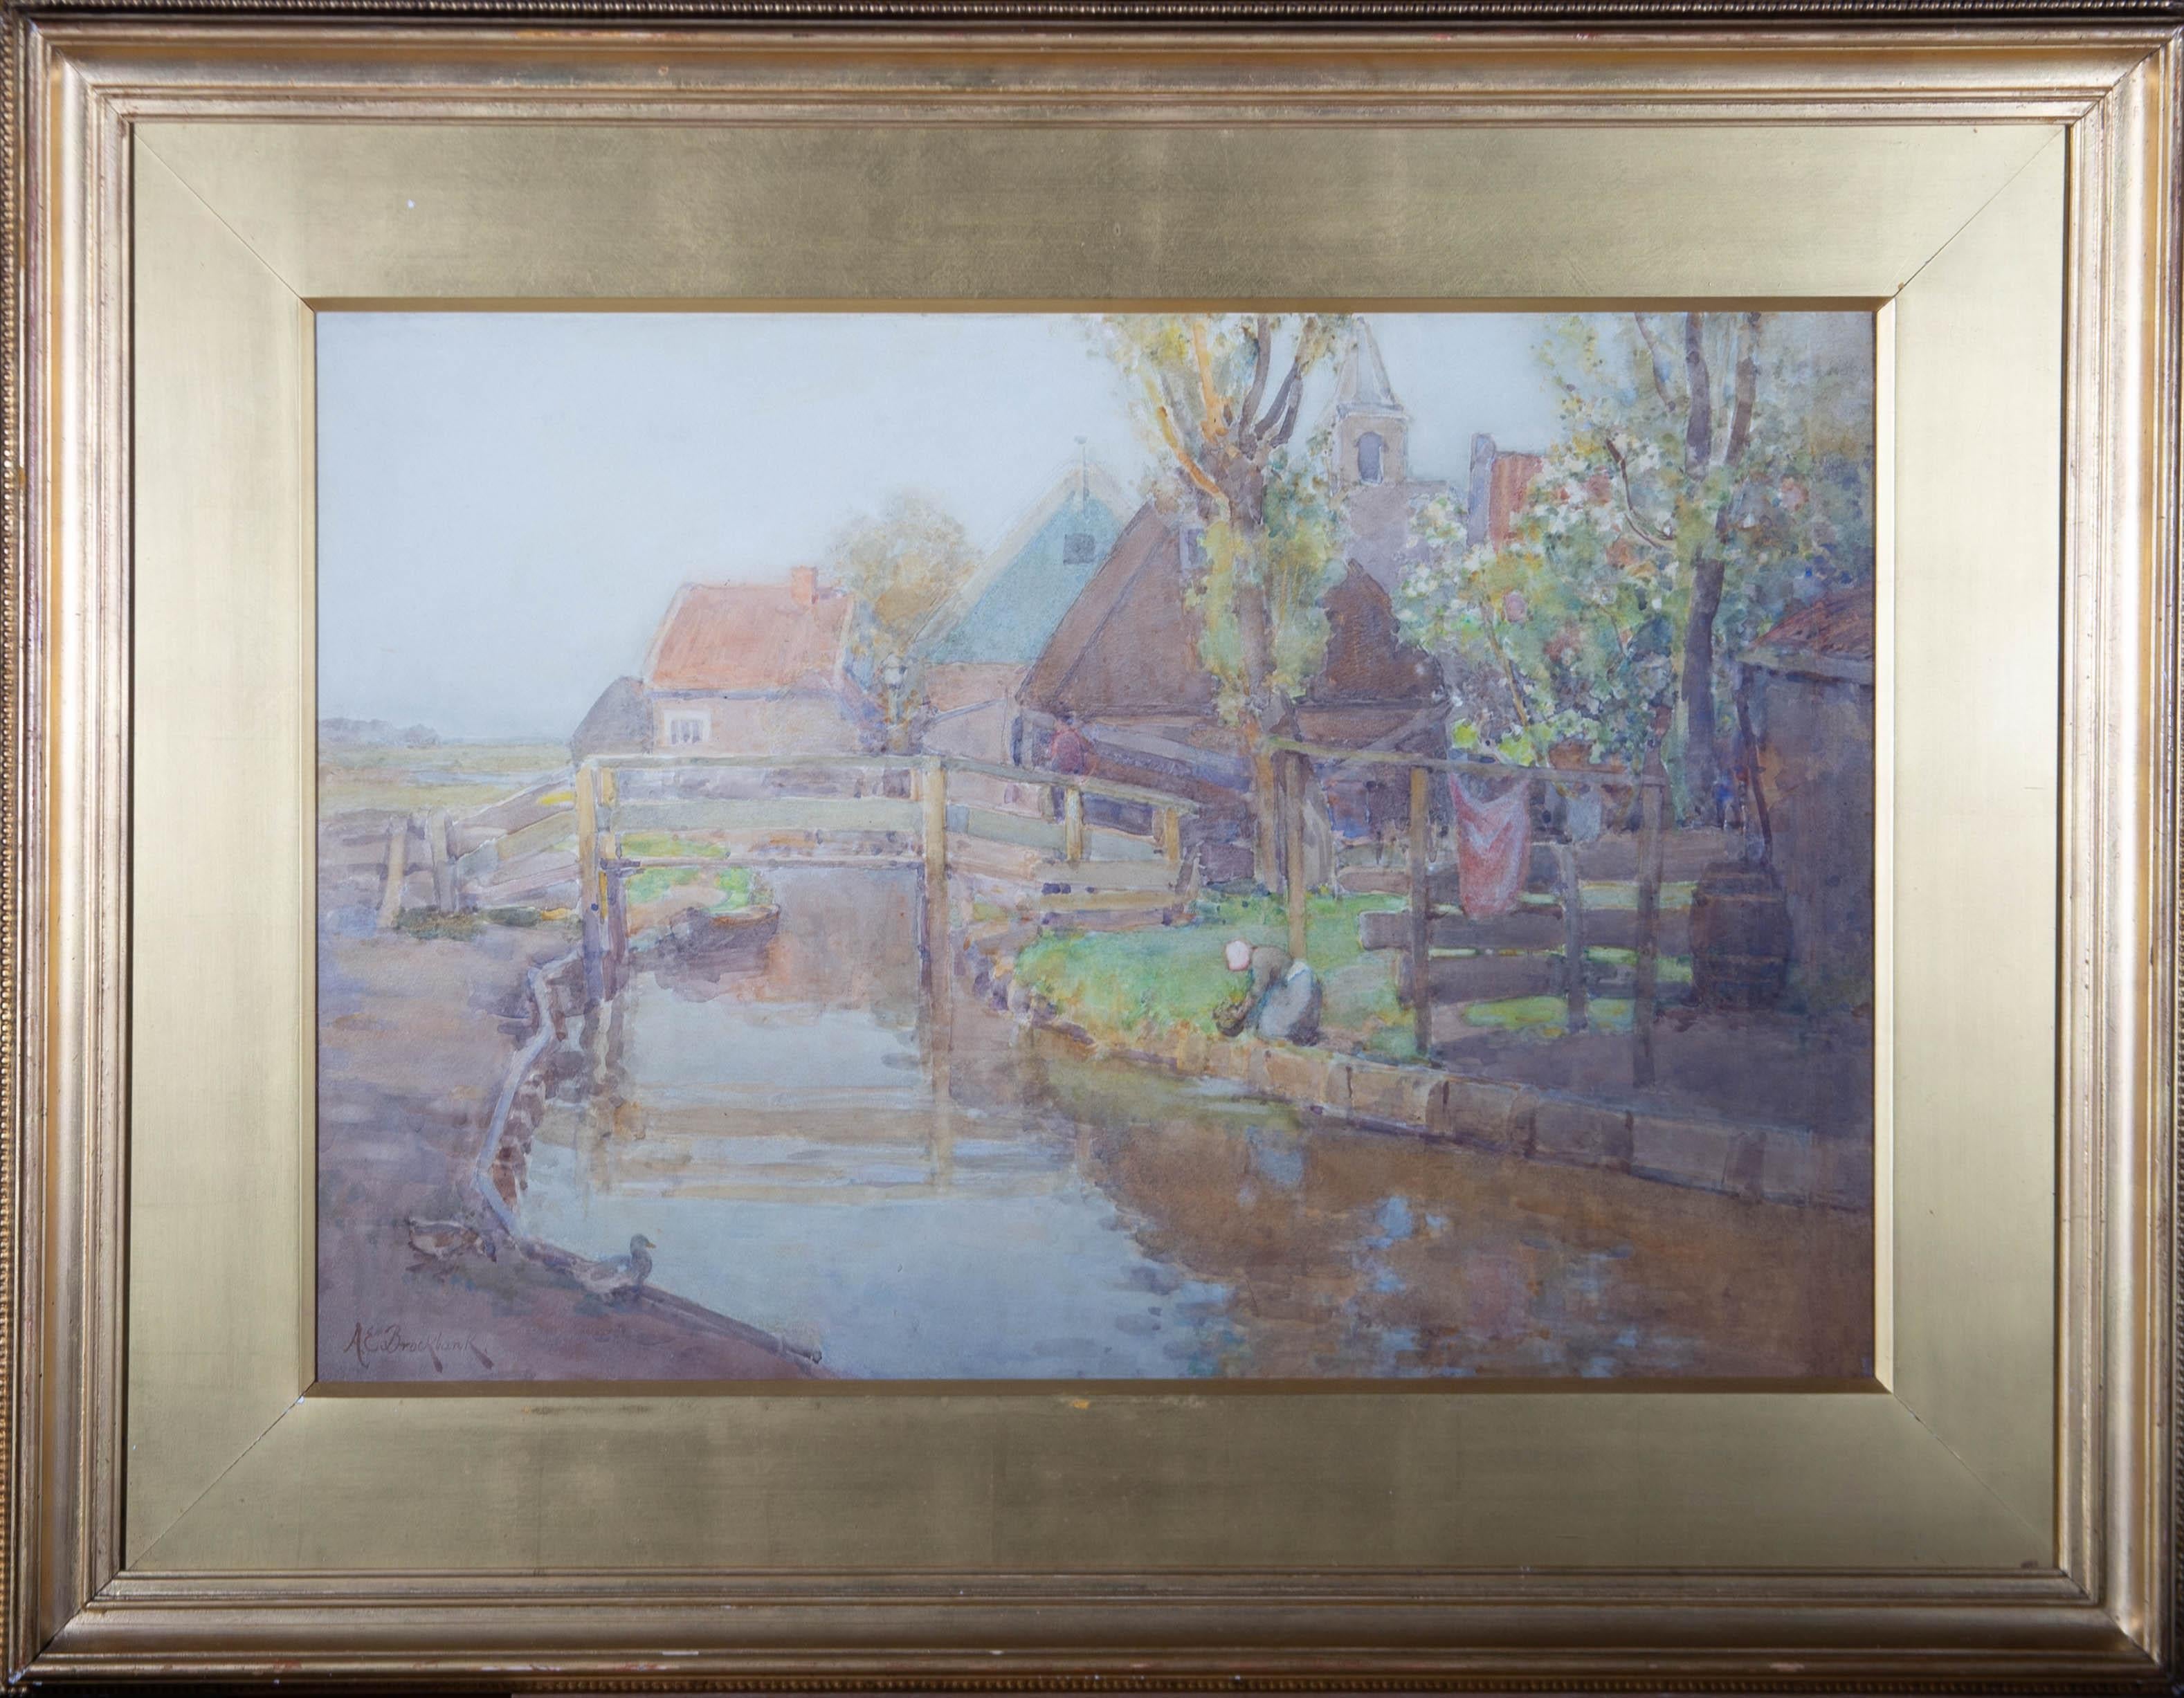 A view along a canal in the countryside, featuring a woman washing clothes before hanging them on the line beside her. Two ducks stand to the left side of the foreground. Presented glazed in a distressed gilt-effect wooden frame with a gilt-effect